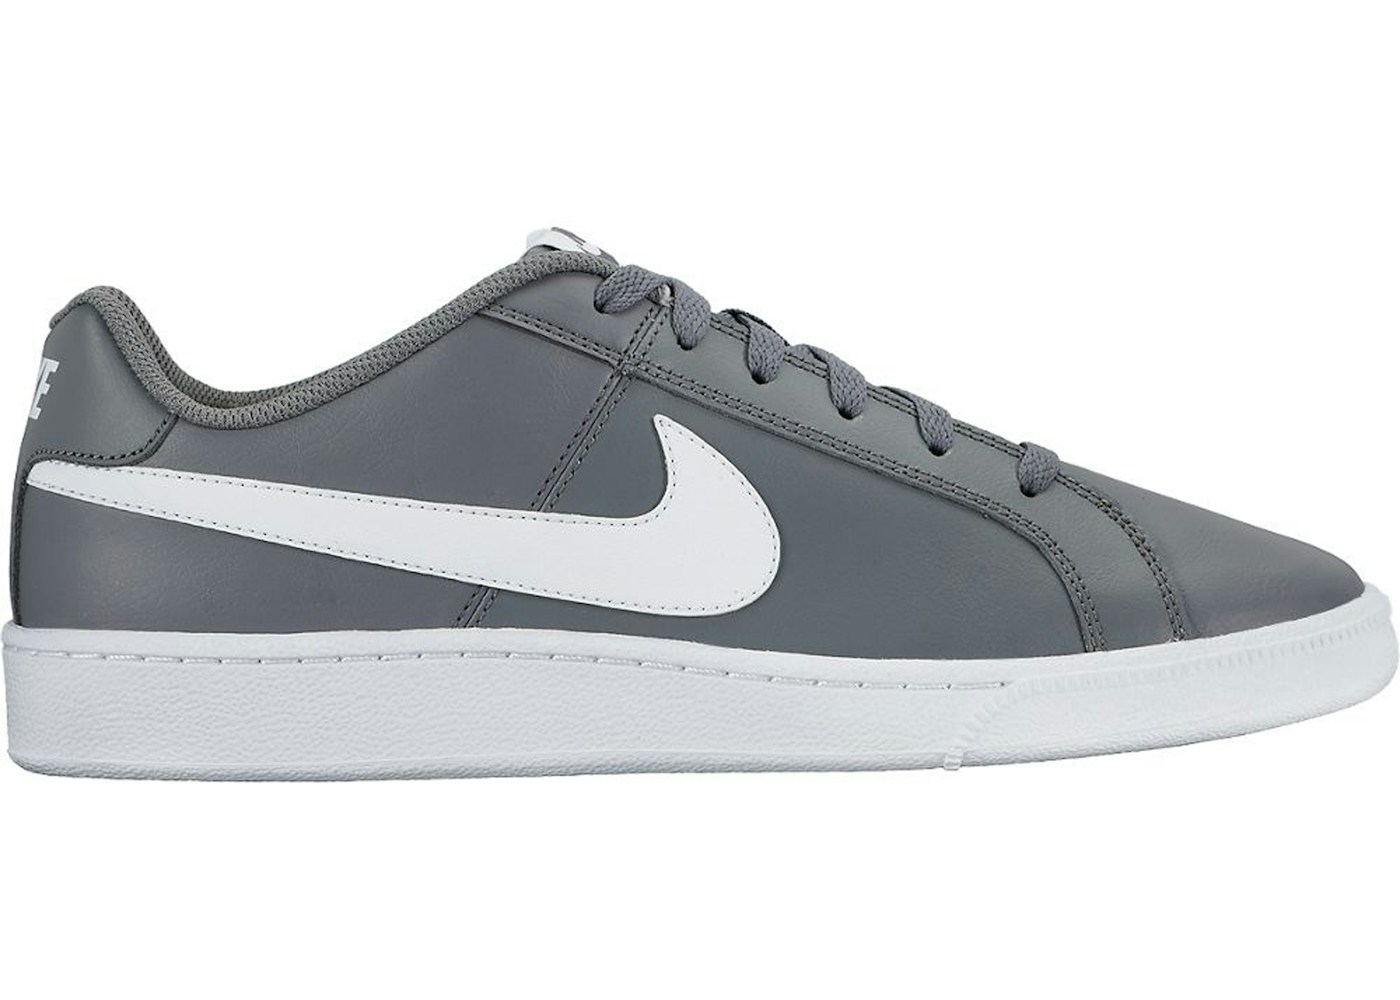 Nike Court Royale Cool Grey - 749747-011